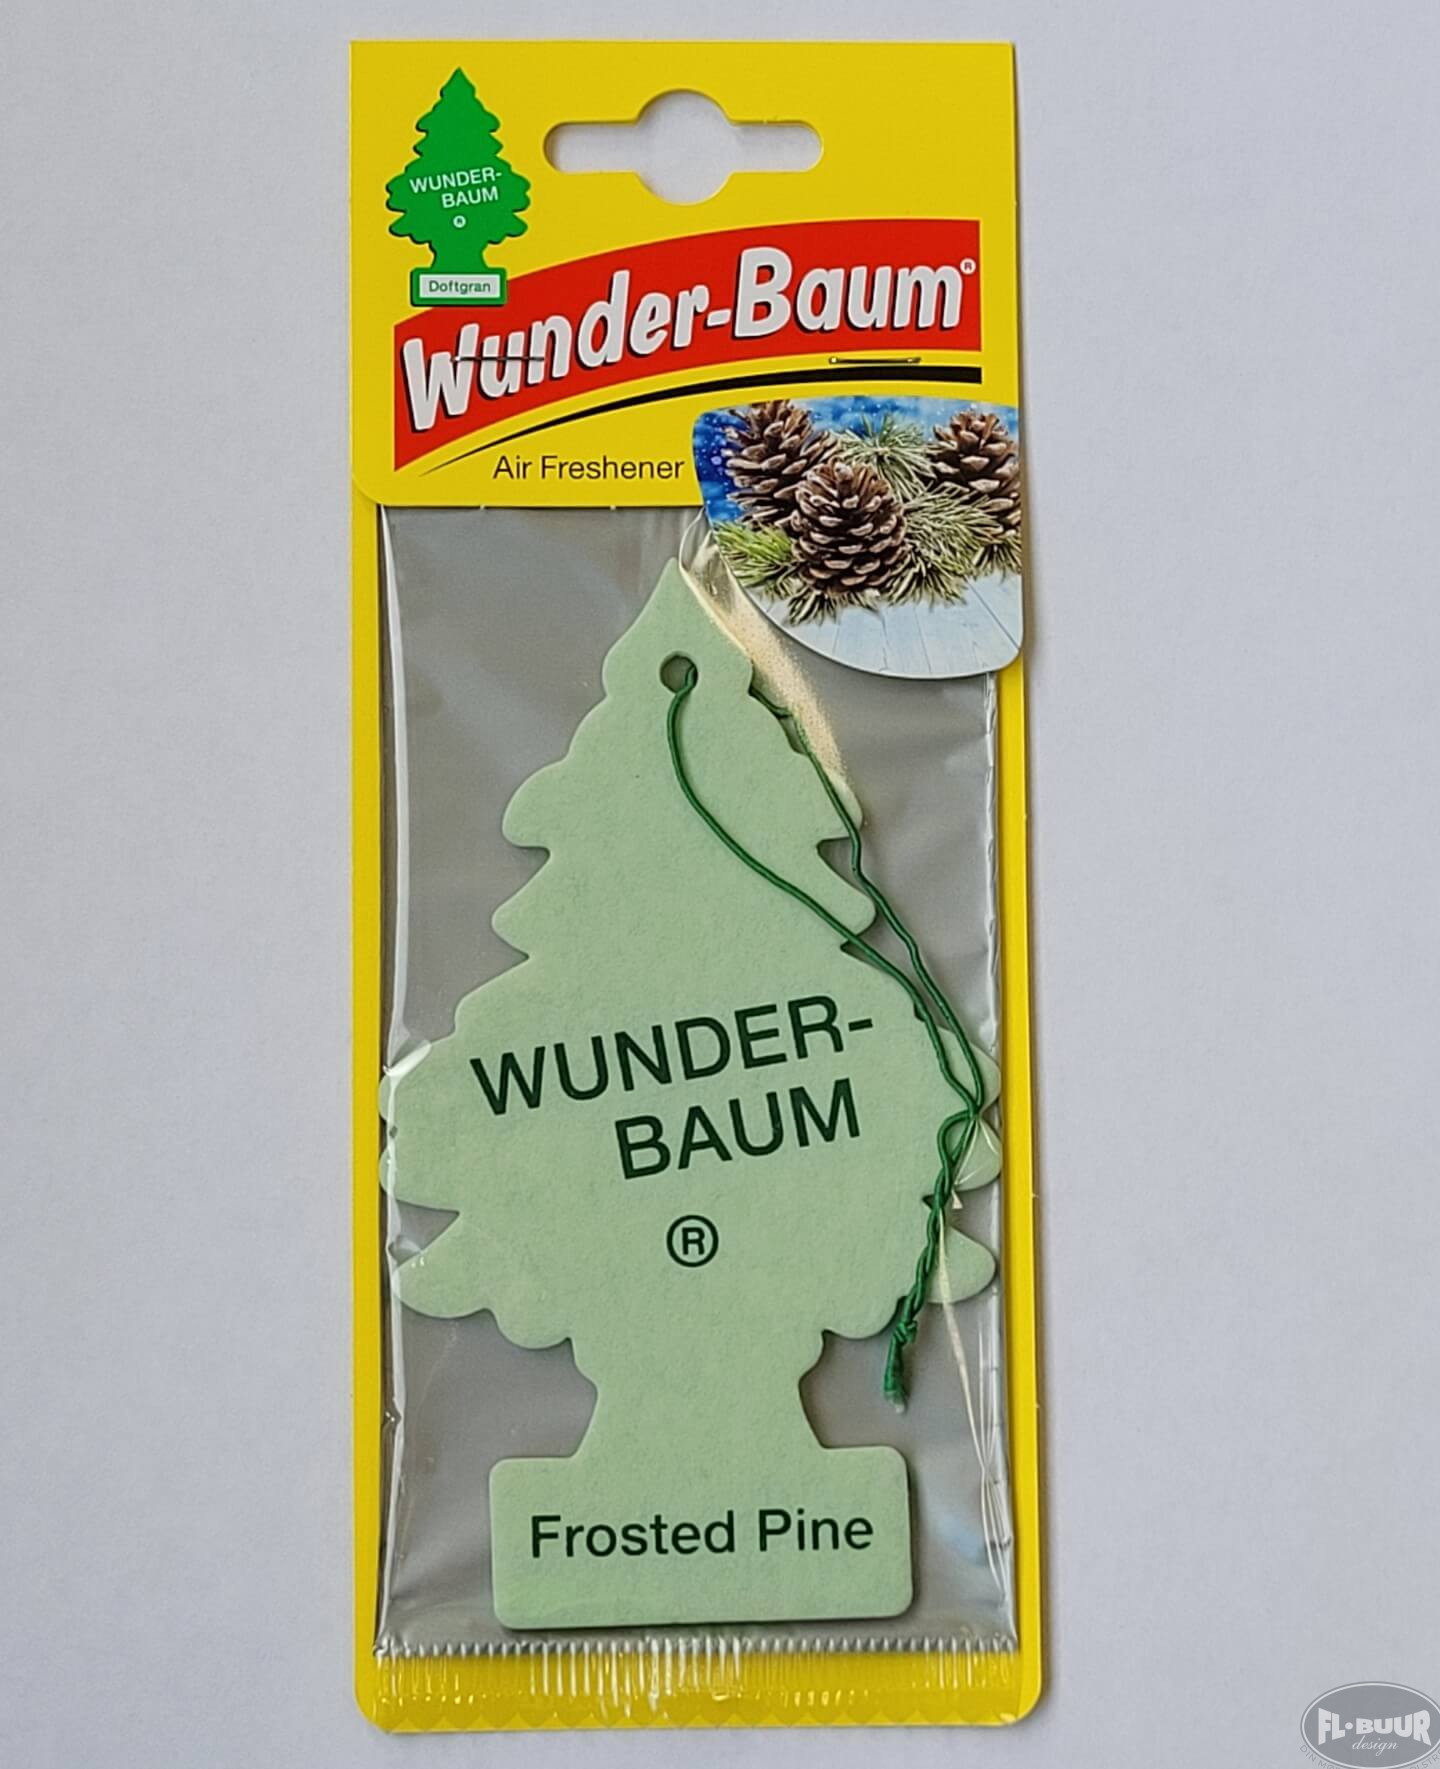 Wunder-Baum - Frosted Pine